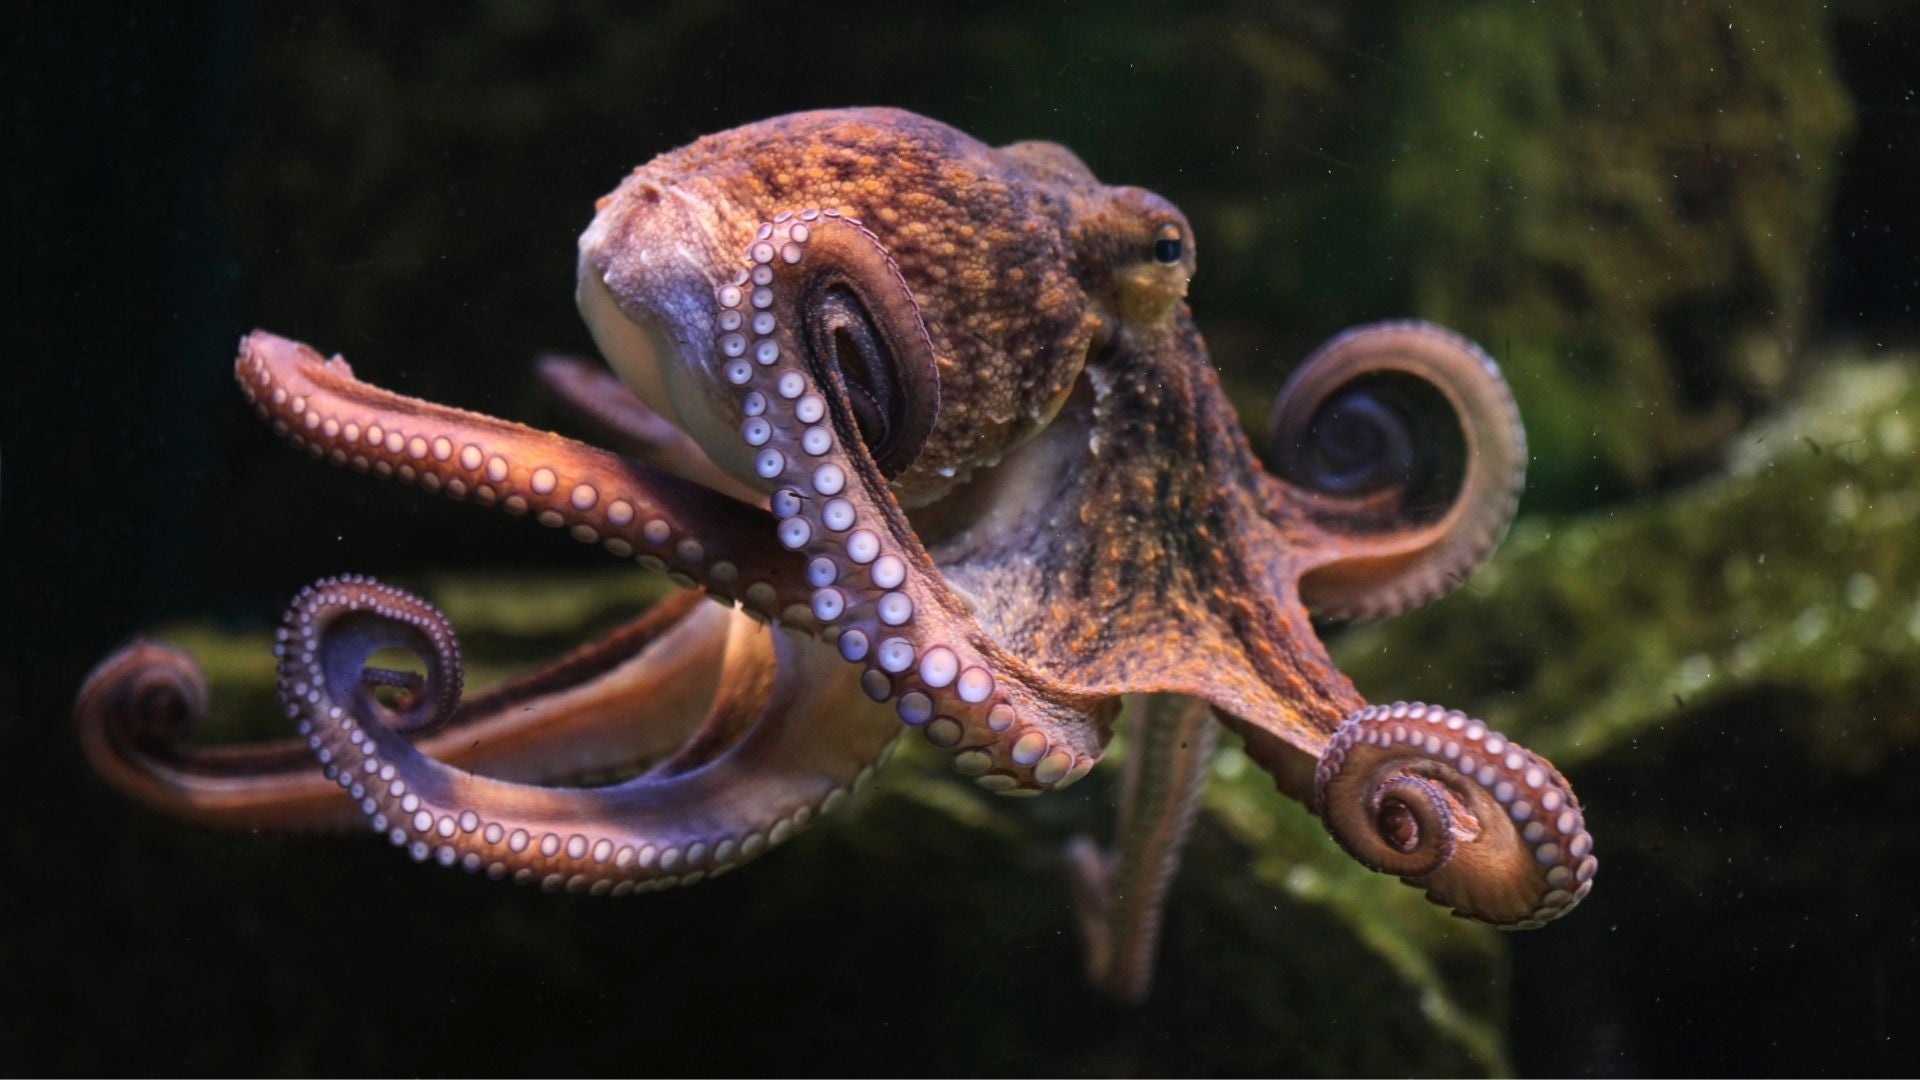 The side profile of a common octopus